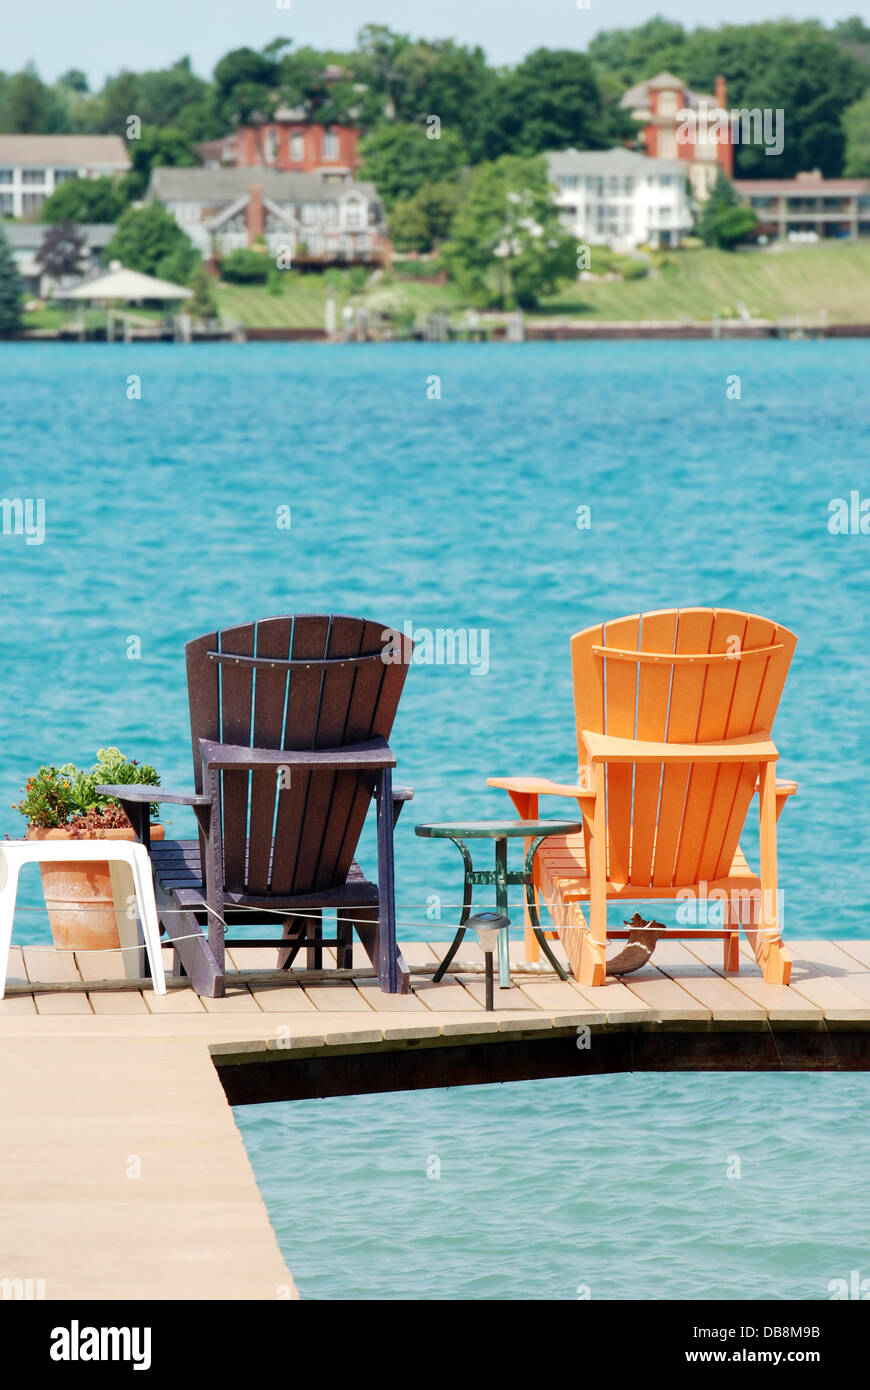 Brown And Orange Adirondack Chairs On A Dock Stock Photo 58583879